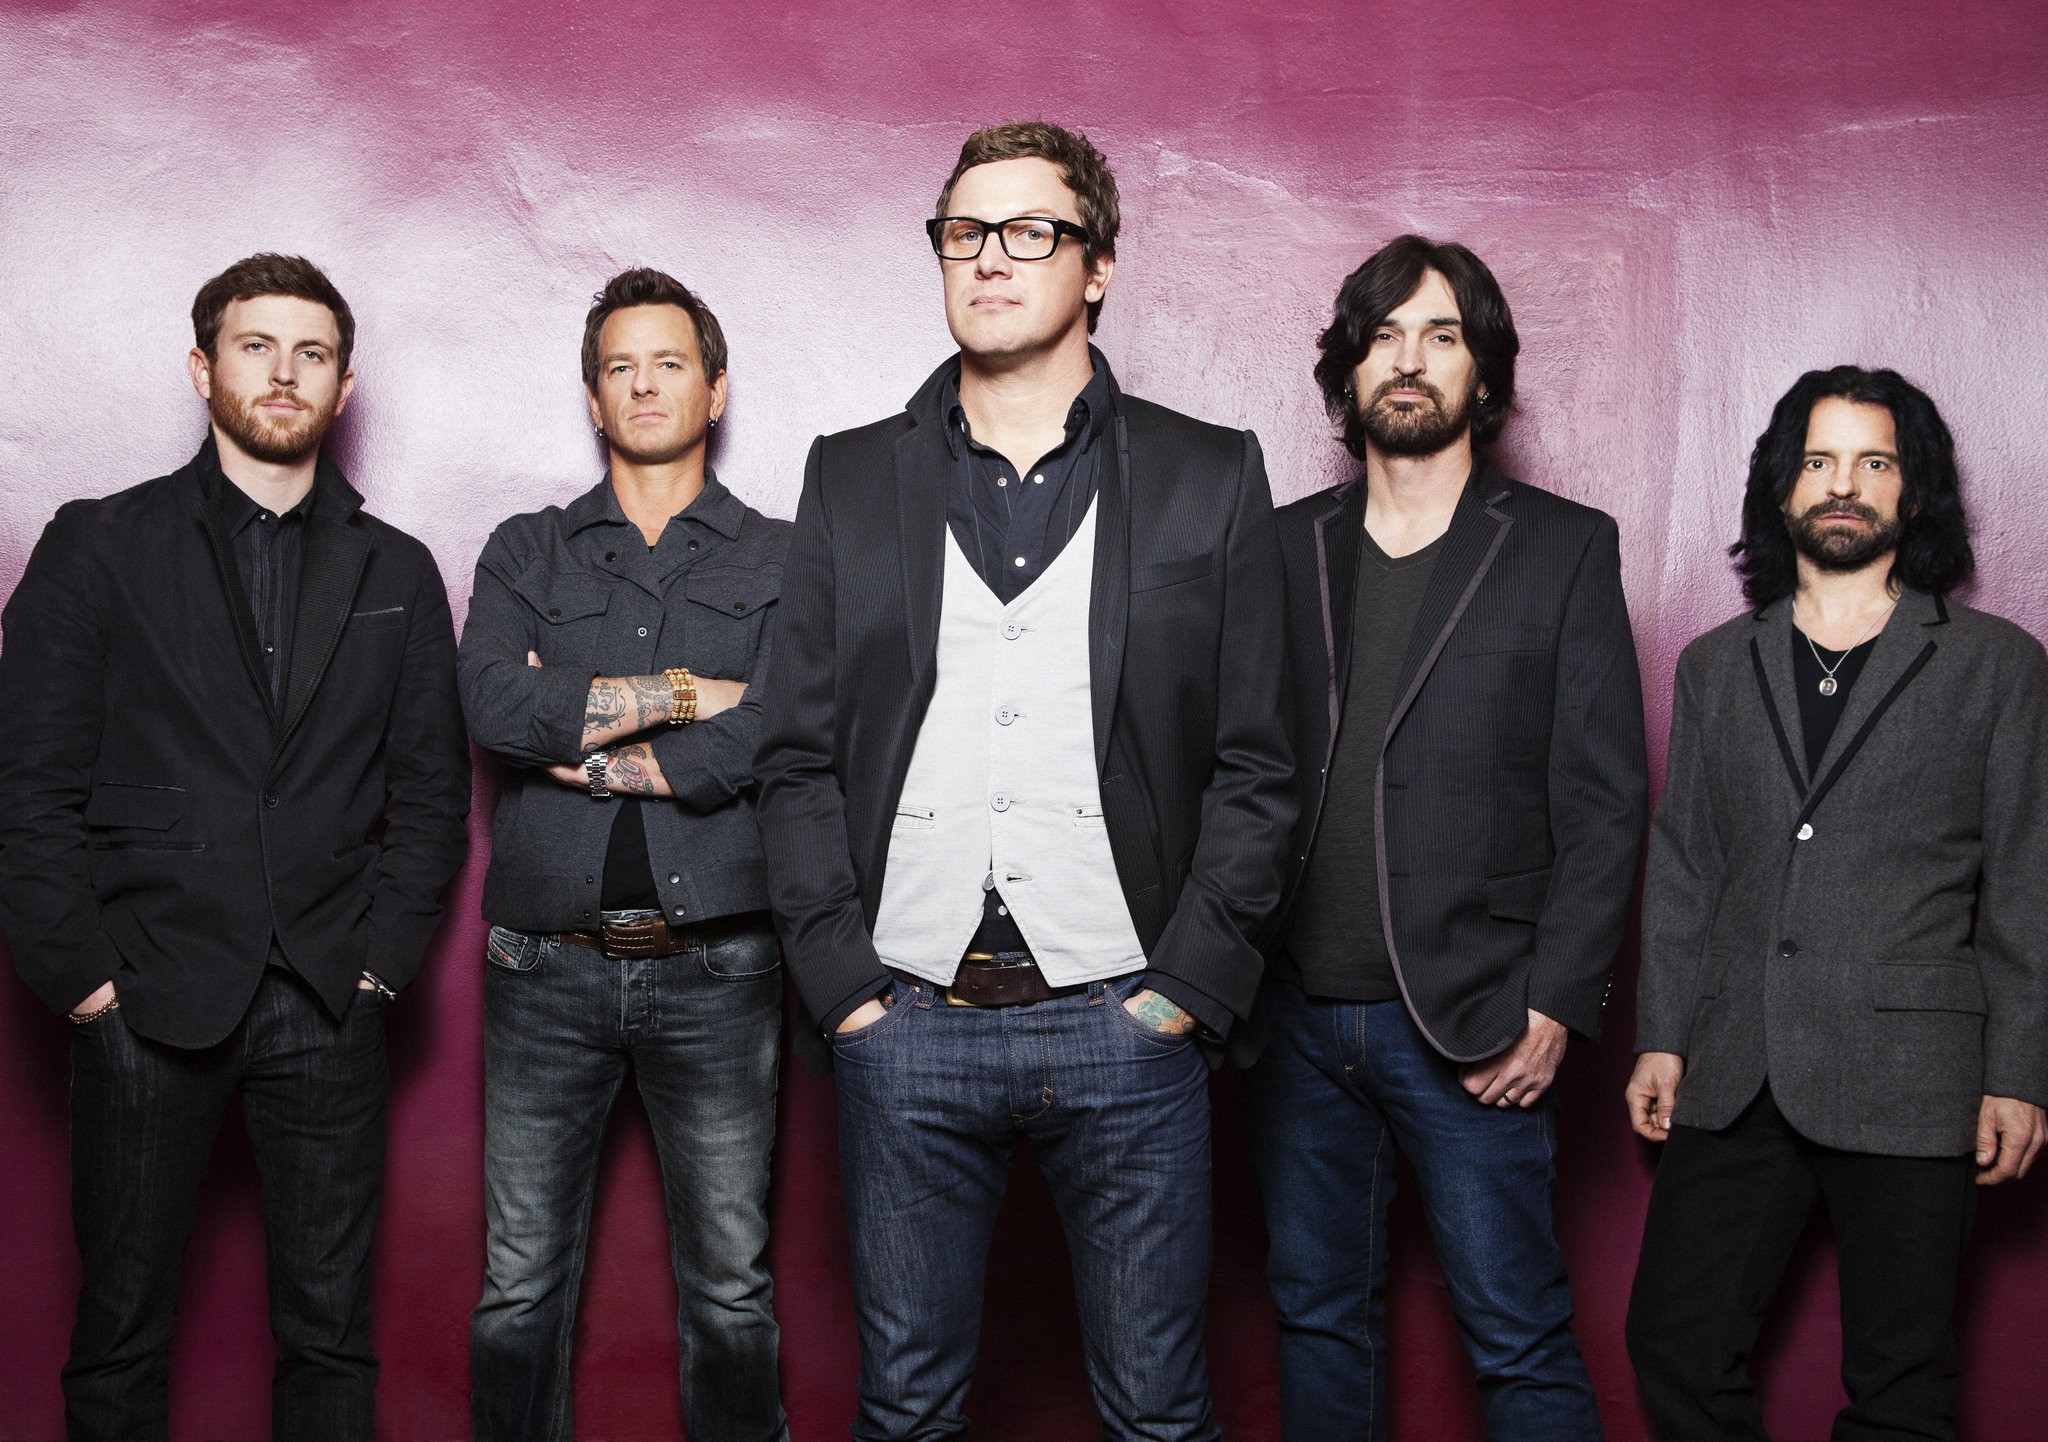 Candlebox Wallpapers